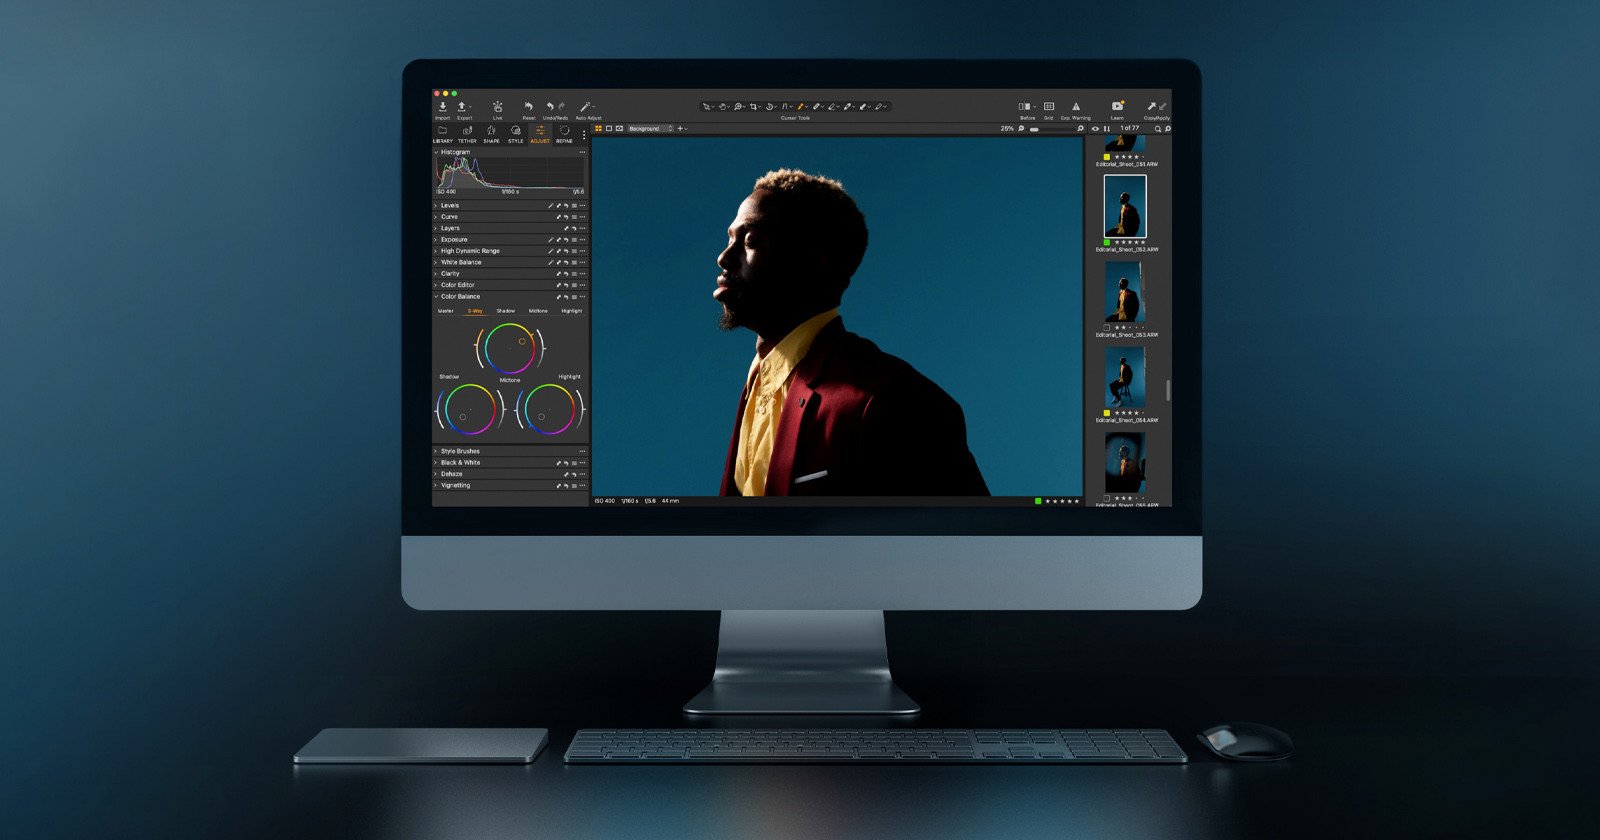  capture one gets features significant tools 